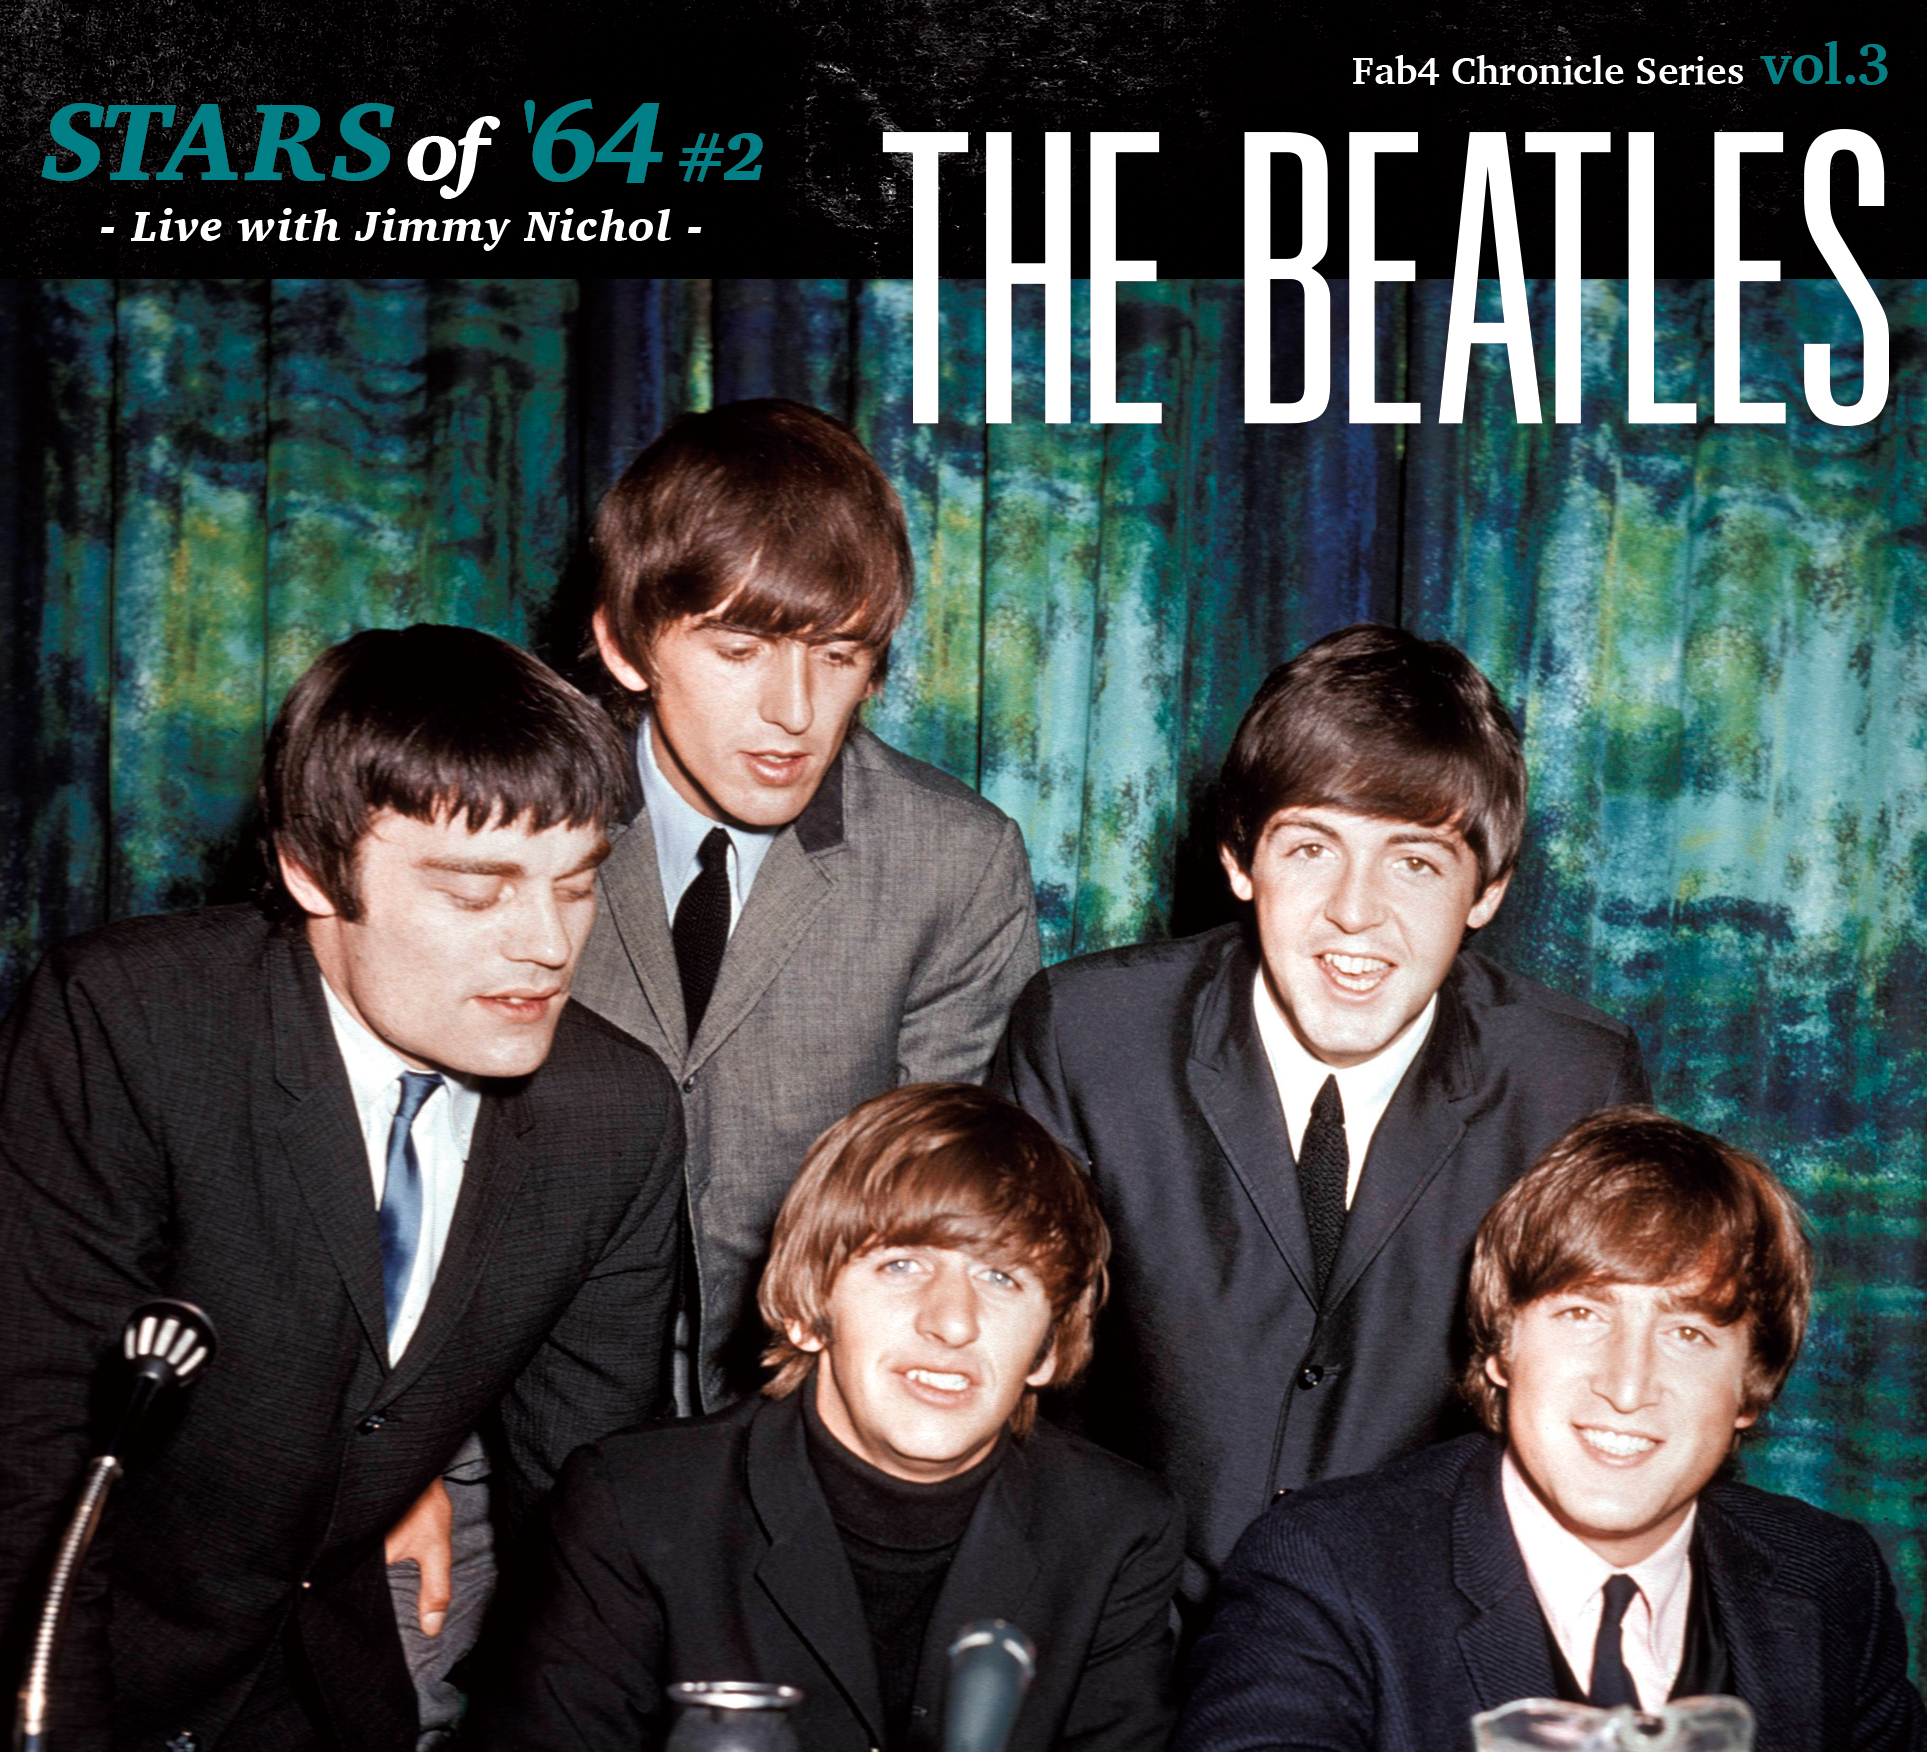 THE BEATLES / STARS of ’64 #2 Fab Chronicle Series vol.3